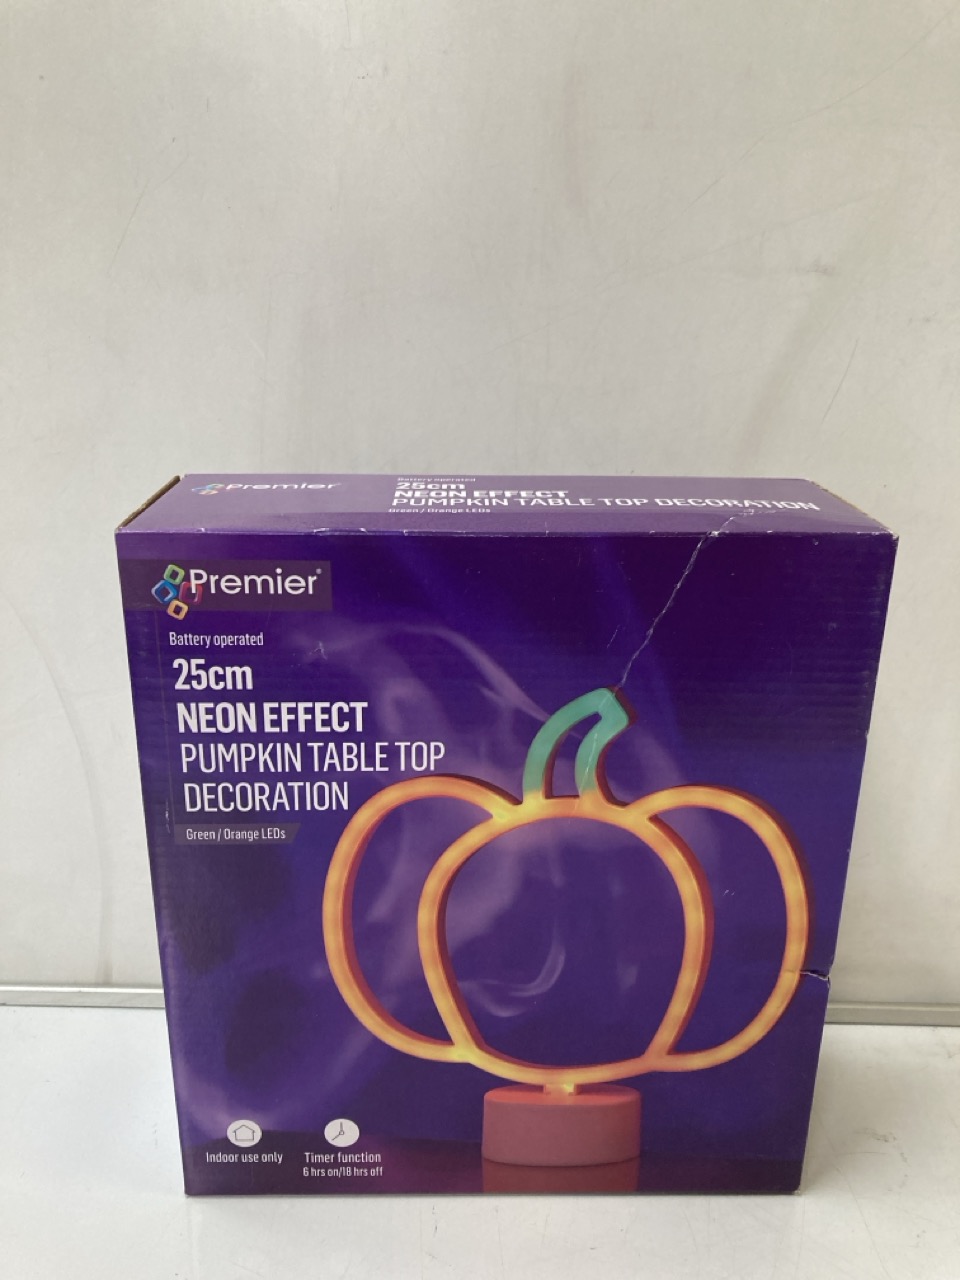 A QTY OF 25CM NEON EFFECT PUMPKIN TABLE TOP DECORATIONS